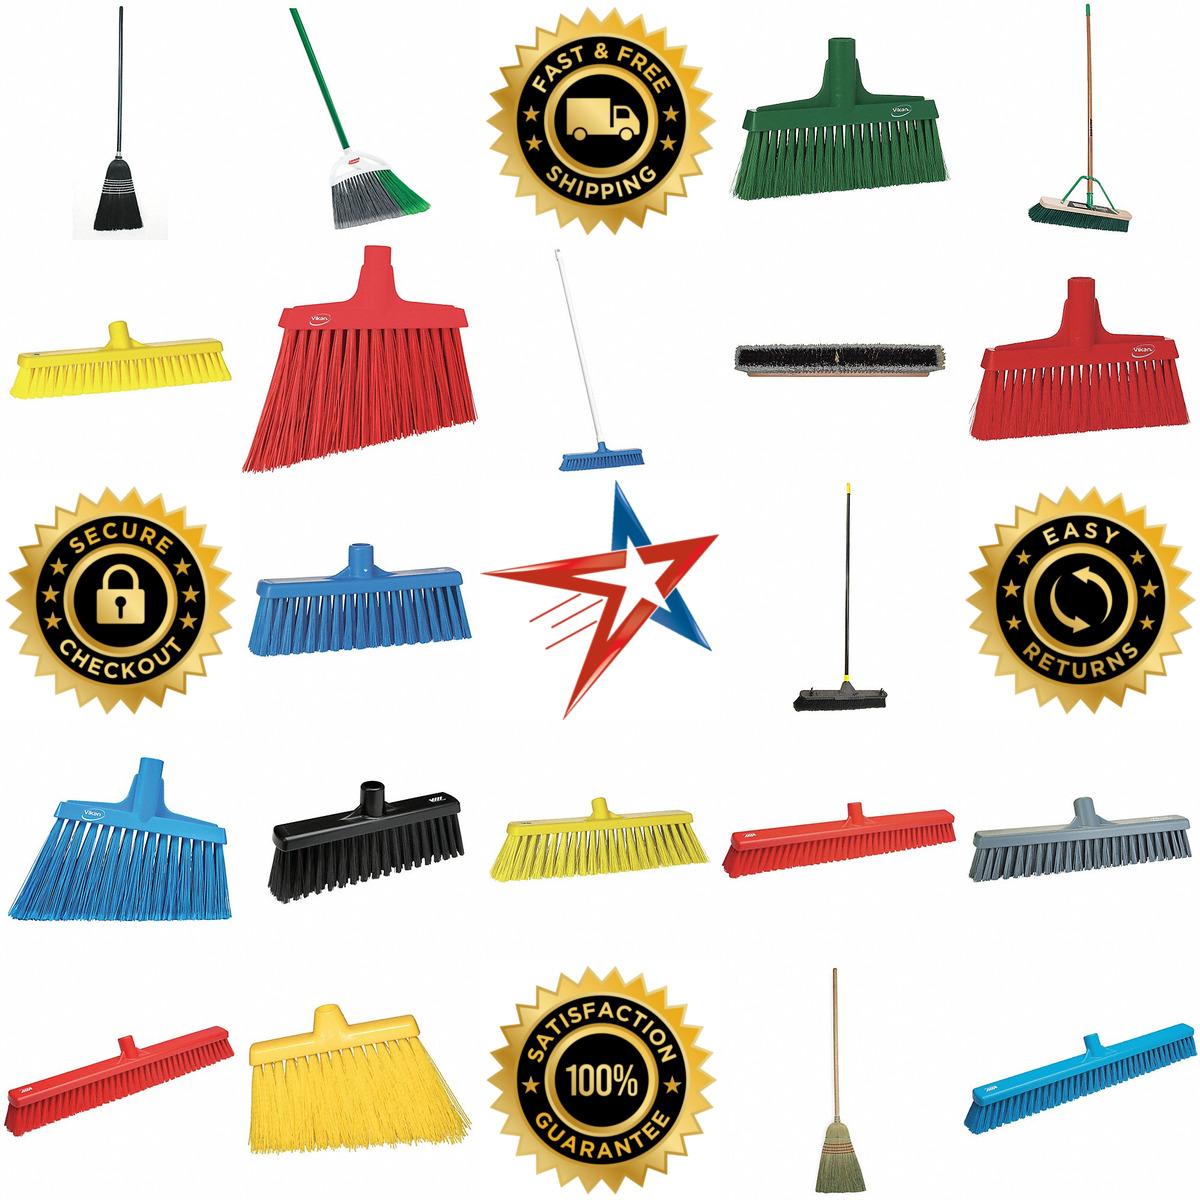 A selection of Brooms products on GoVets